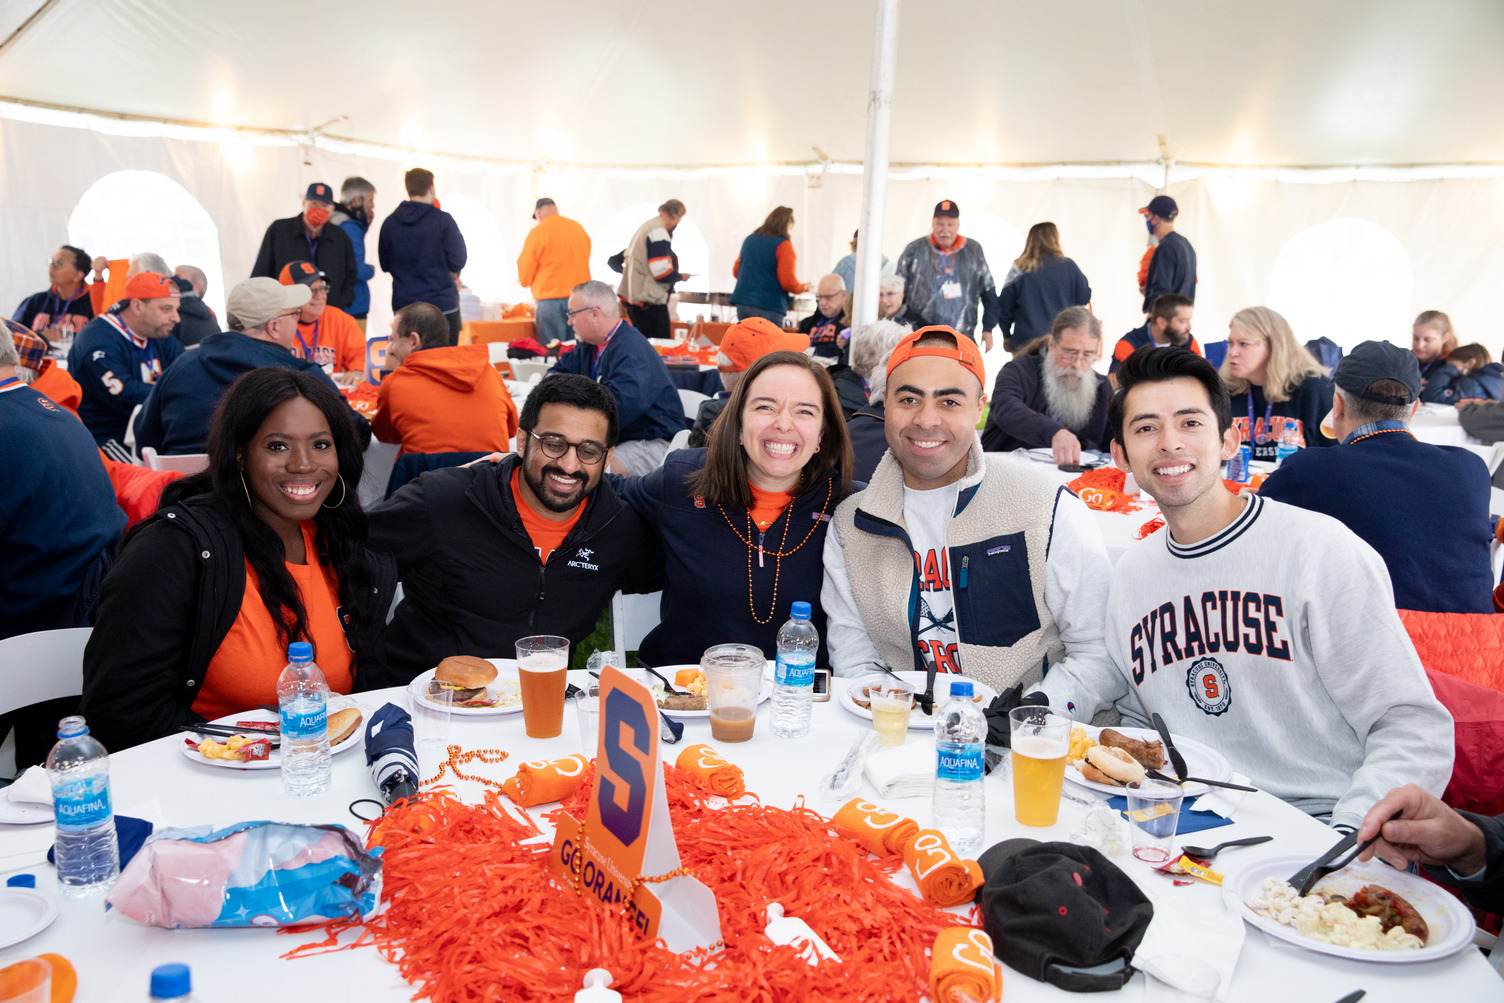 group of friends pose together during a meal at the Orange Central tailgate celebration